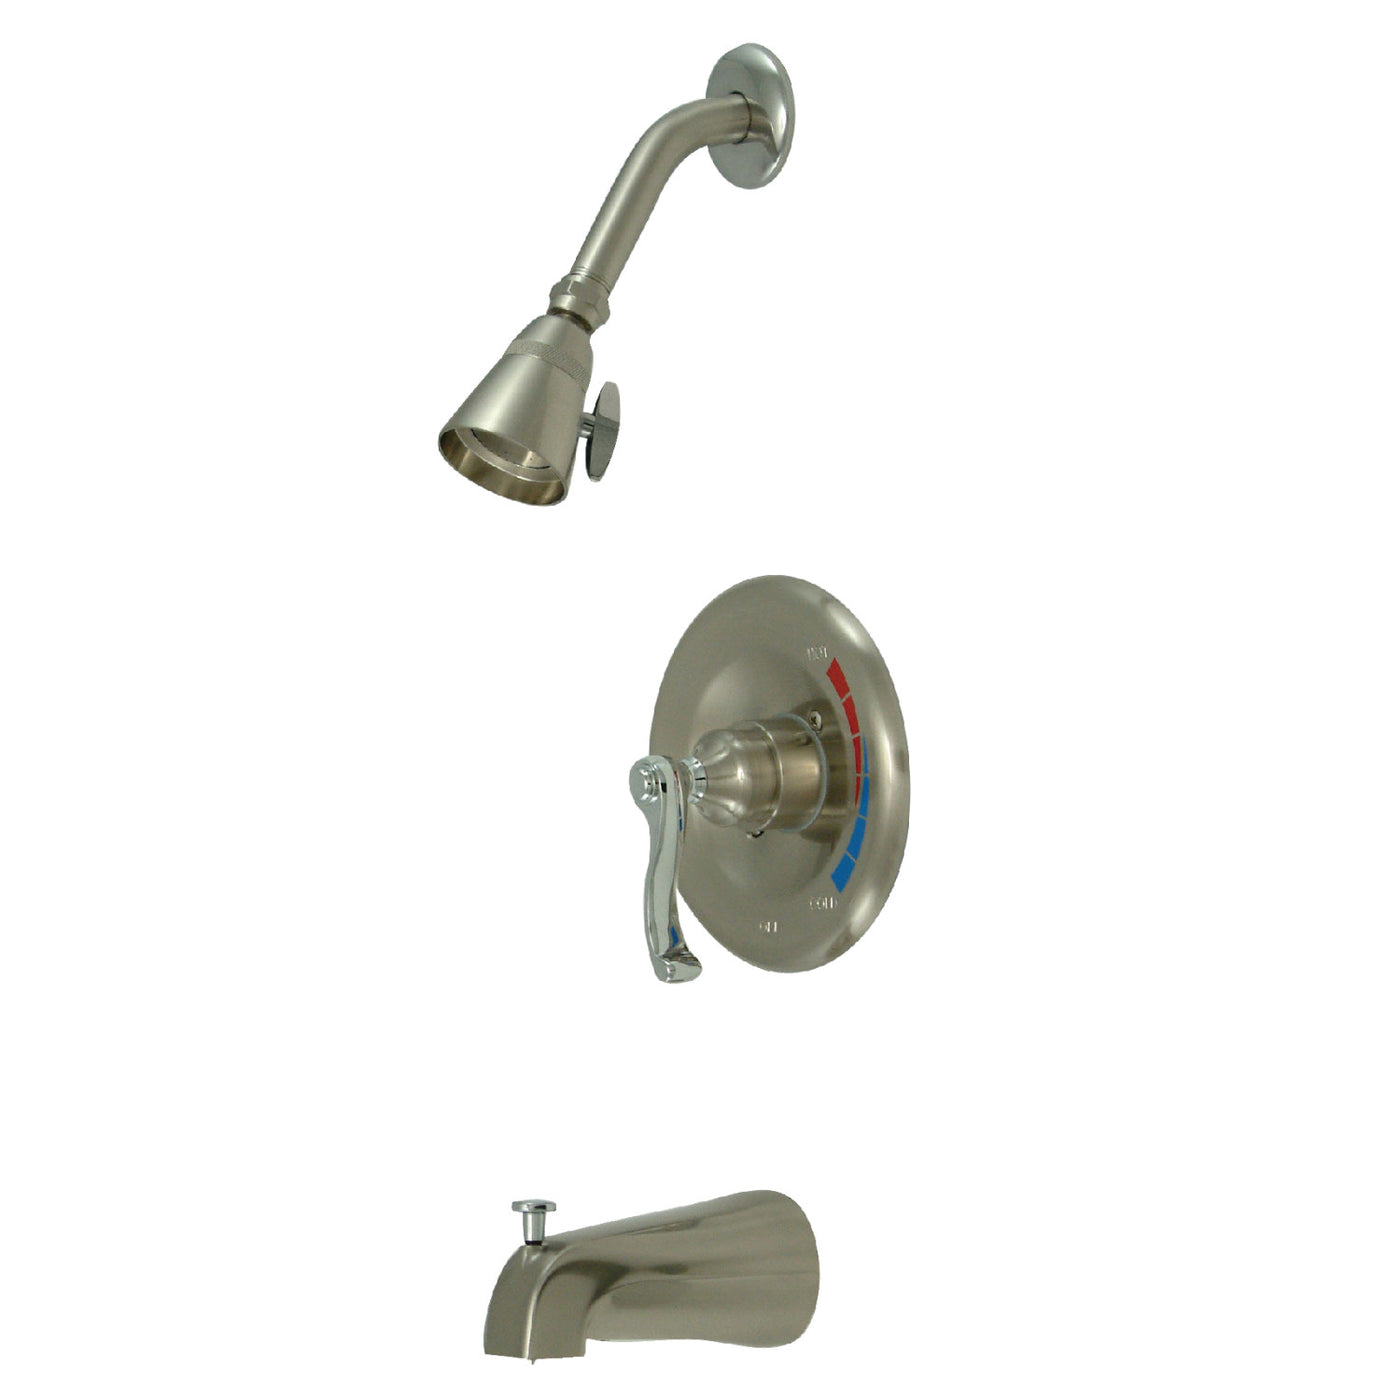 Elements of Design EB8637FL Tub and Shower Faucet, Brushed Nickel/Polished Chrome